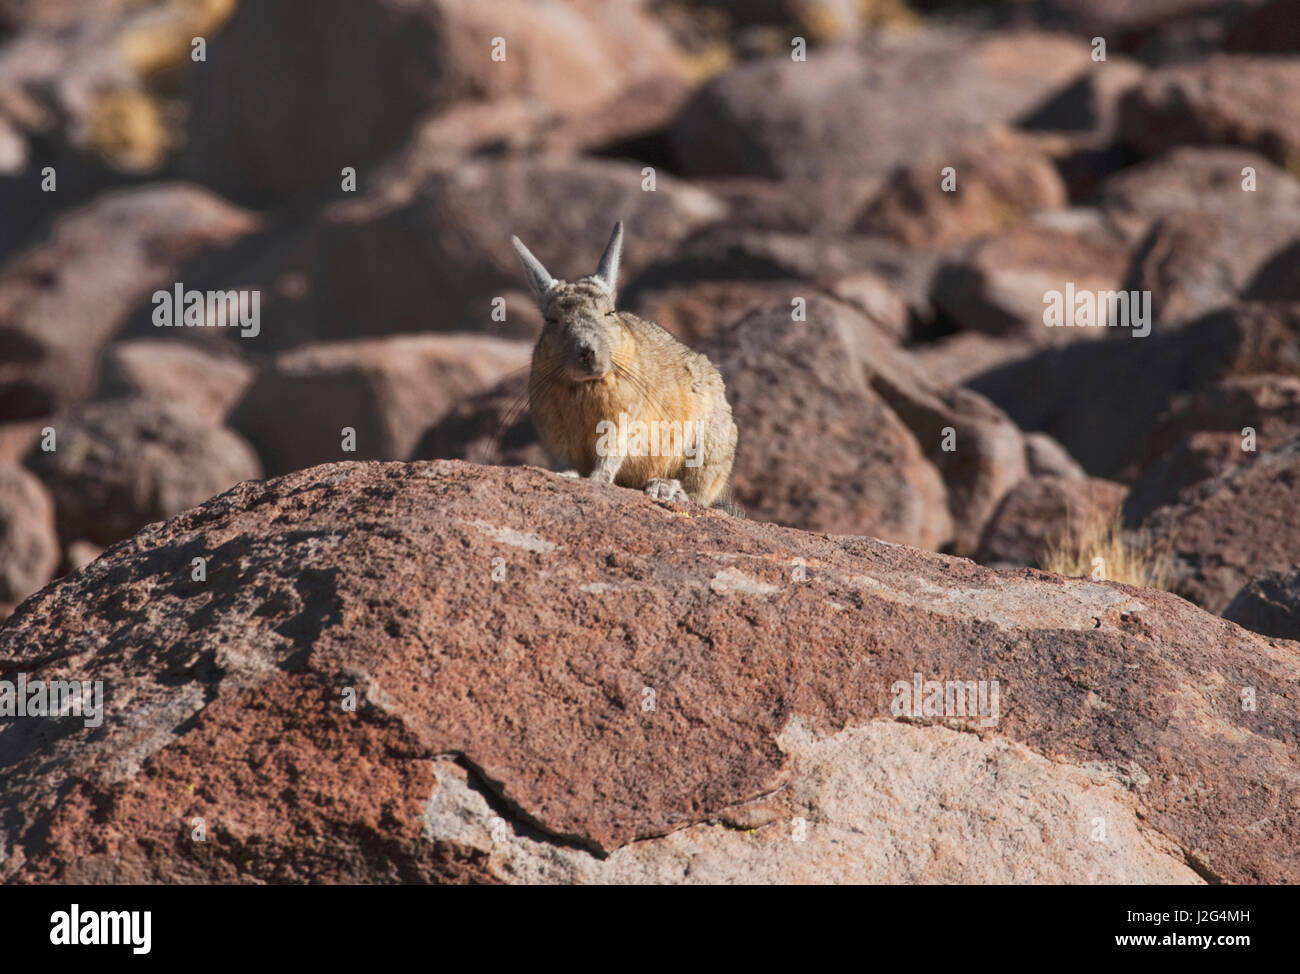 High in the Andes Mountains of the Chilean Atacama desert, at close to 14,000 feet are the El Tatio Geysers. Southern viscacha, a member of the rodent family. Stock Photo